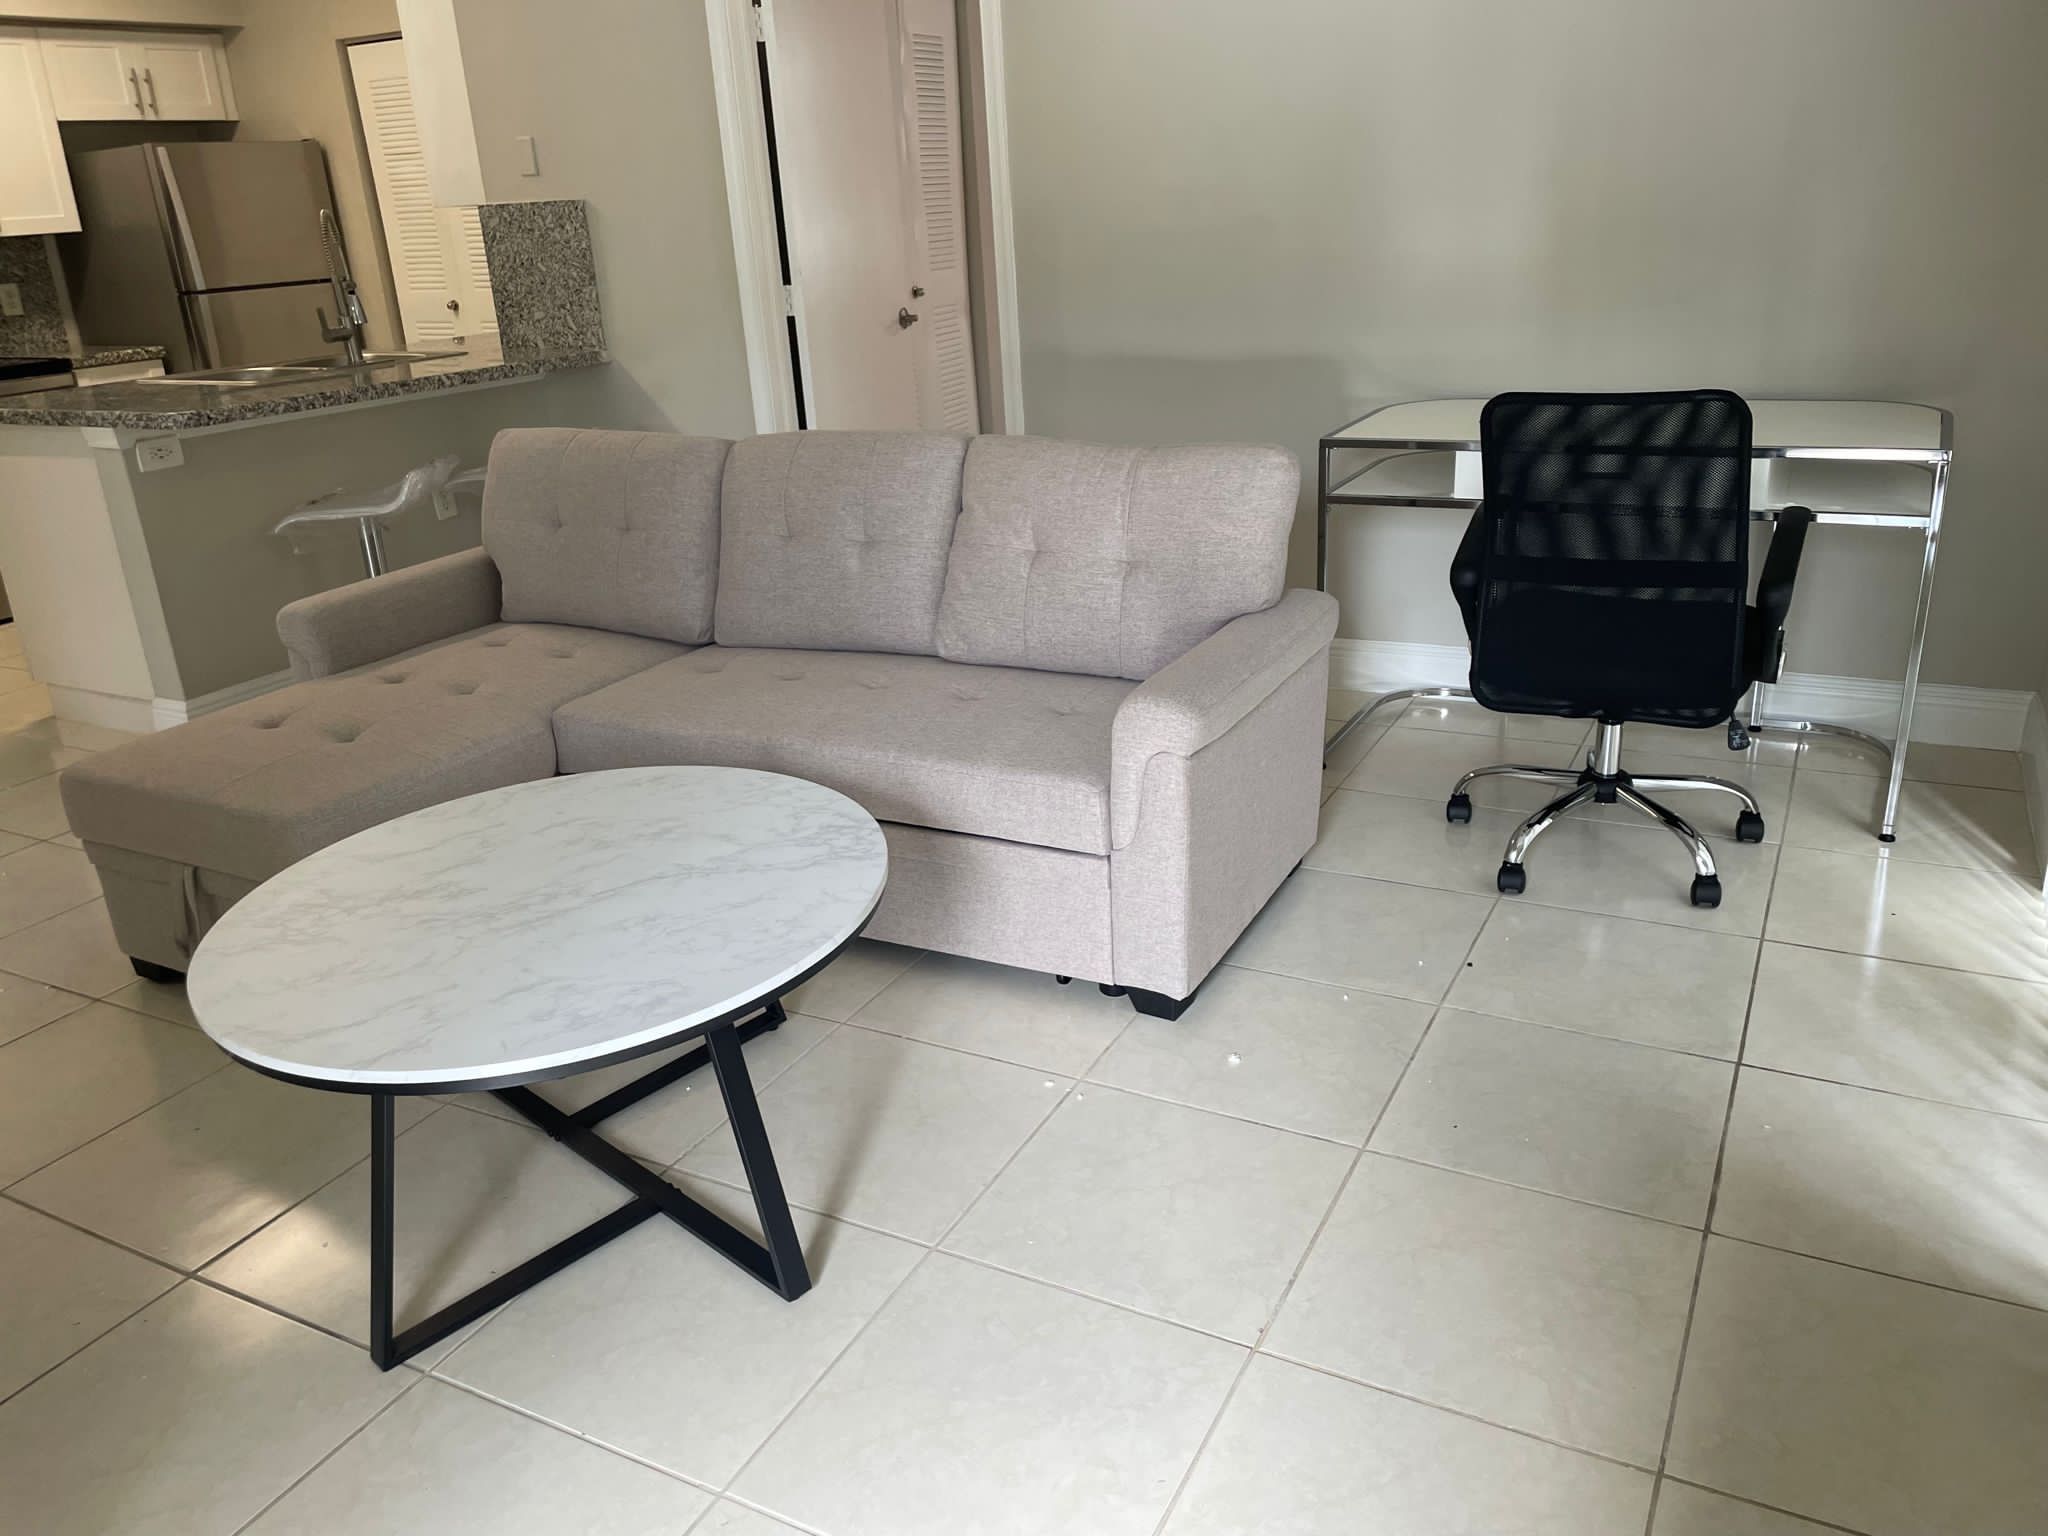 Apartment Furniture for sale